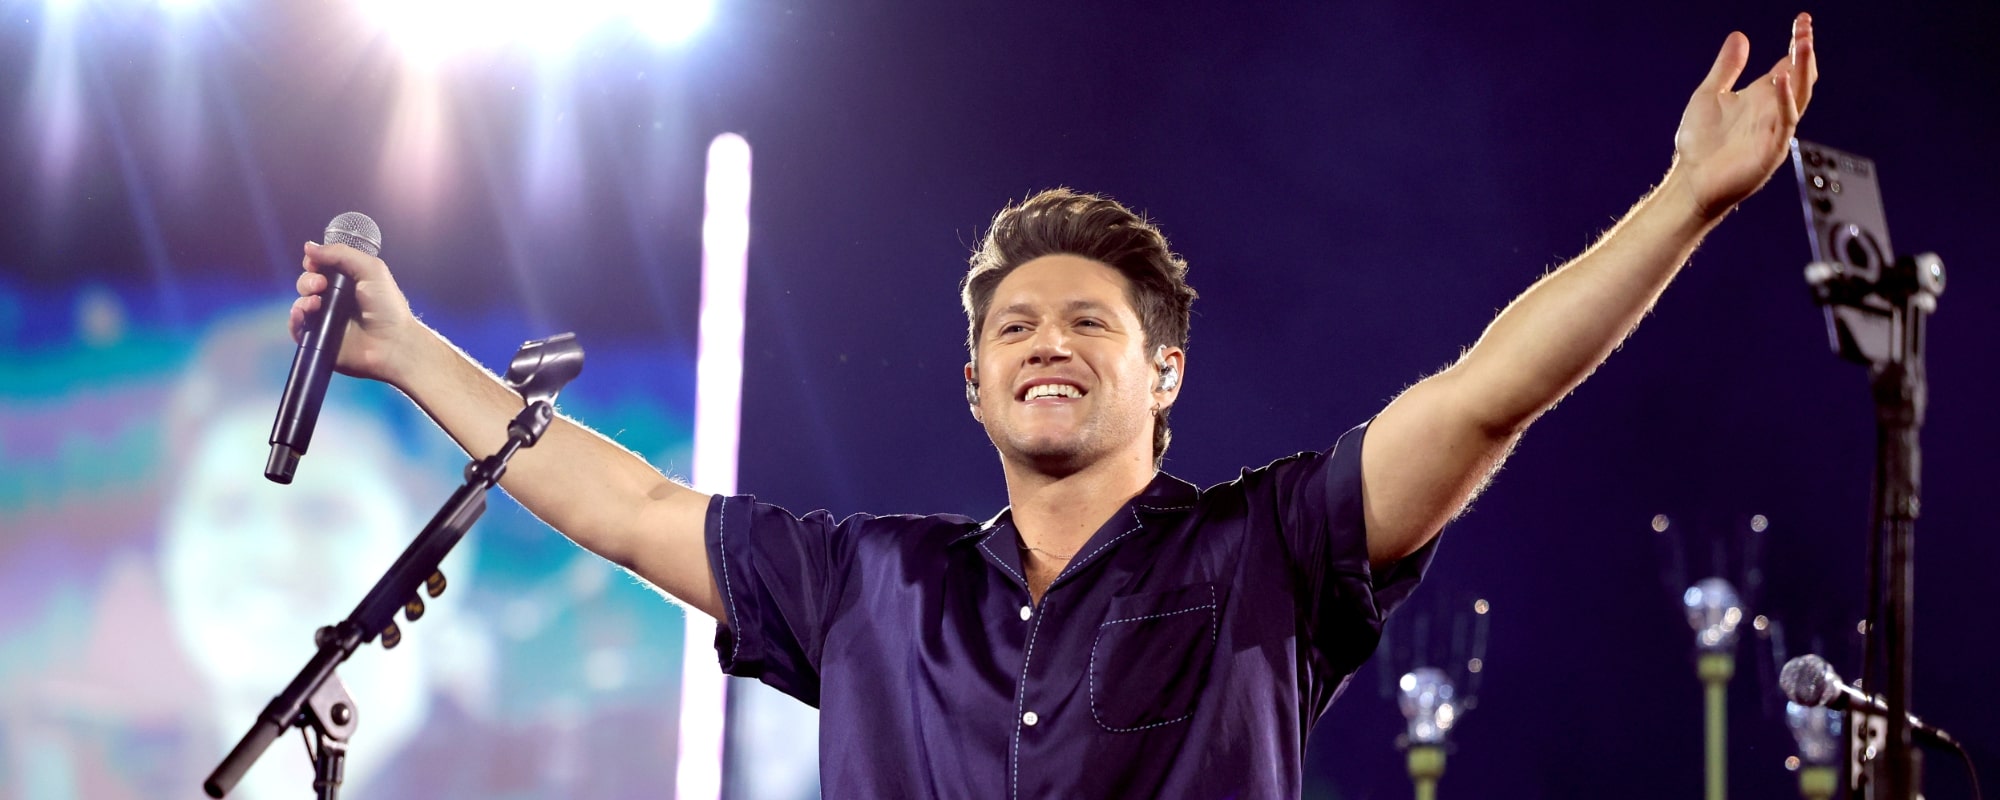 Where Are They Now? ‘The Voice’ Back-to-Back Winner and Ex-Coach Niall Horan